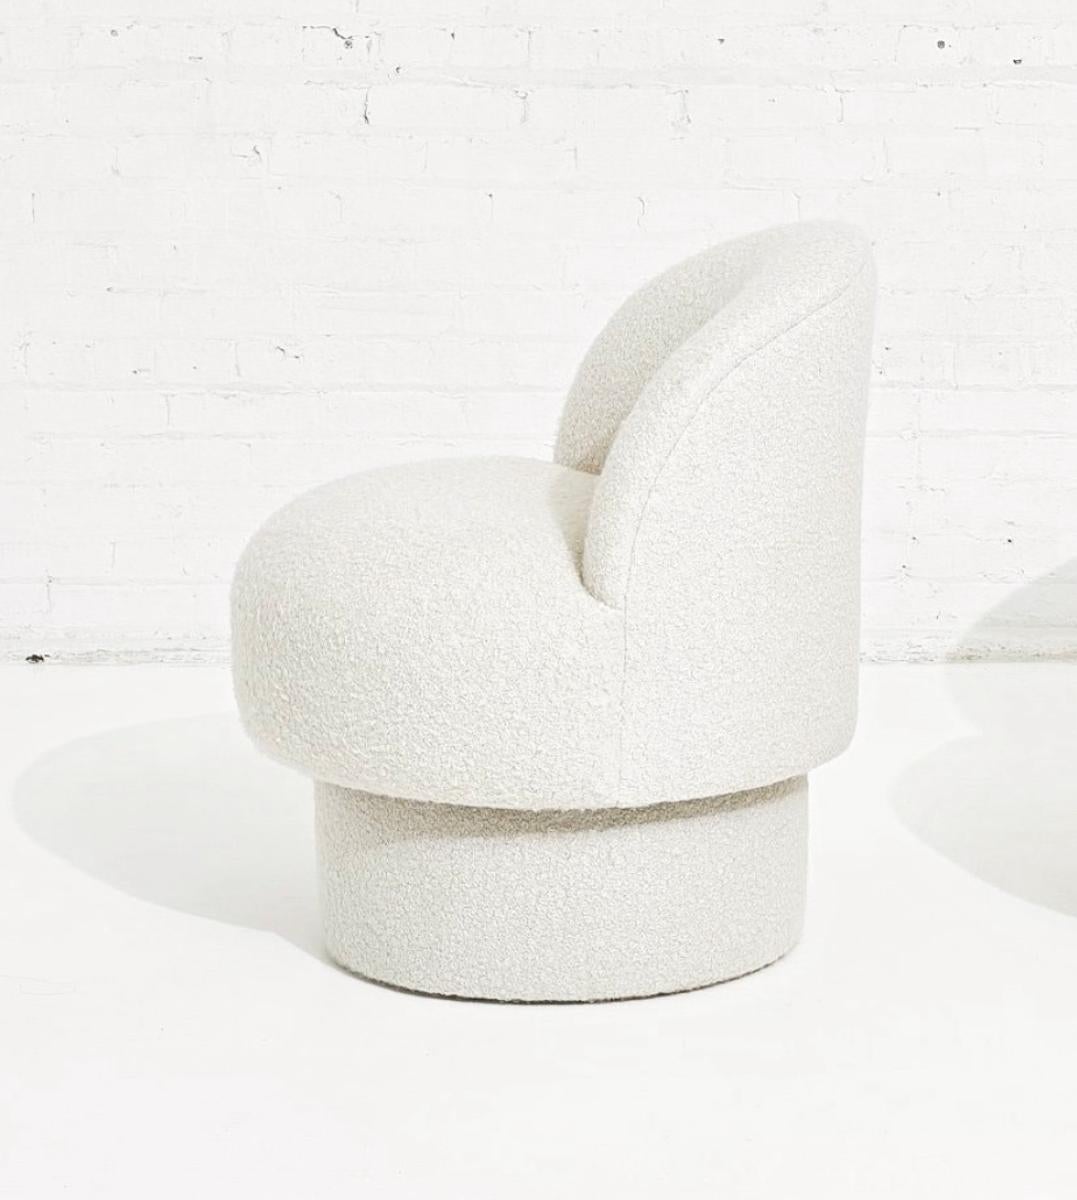 Swivel pouf upholstered in white Italian merino wool/poly blend performance boucle. COM upholstery option available as well.